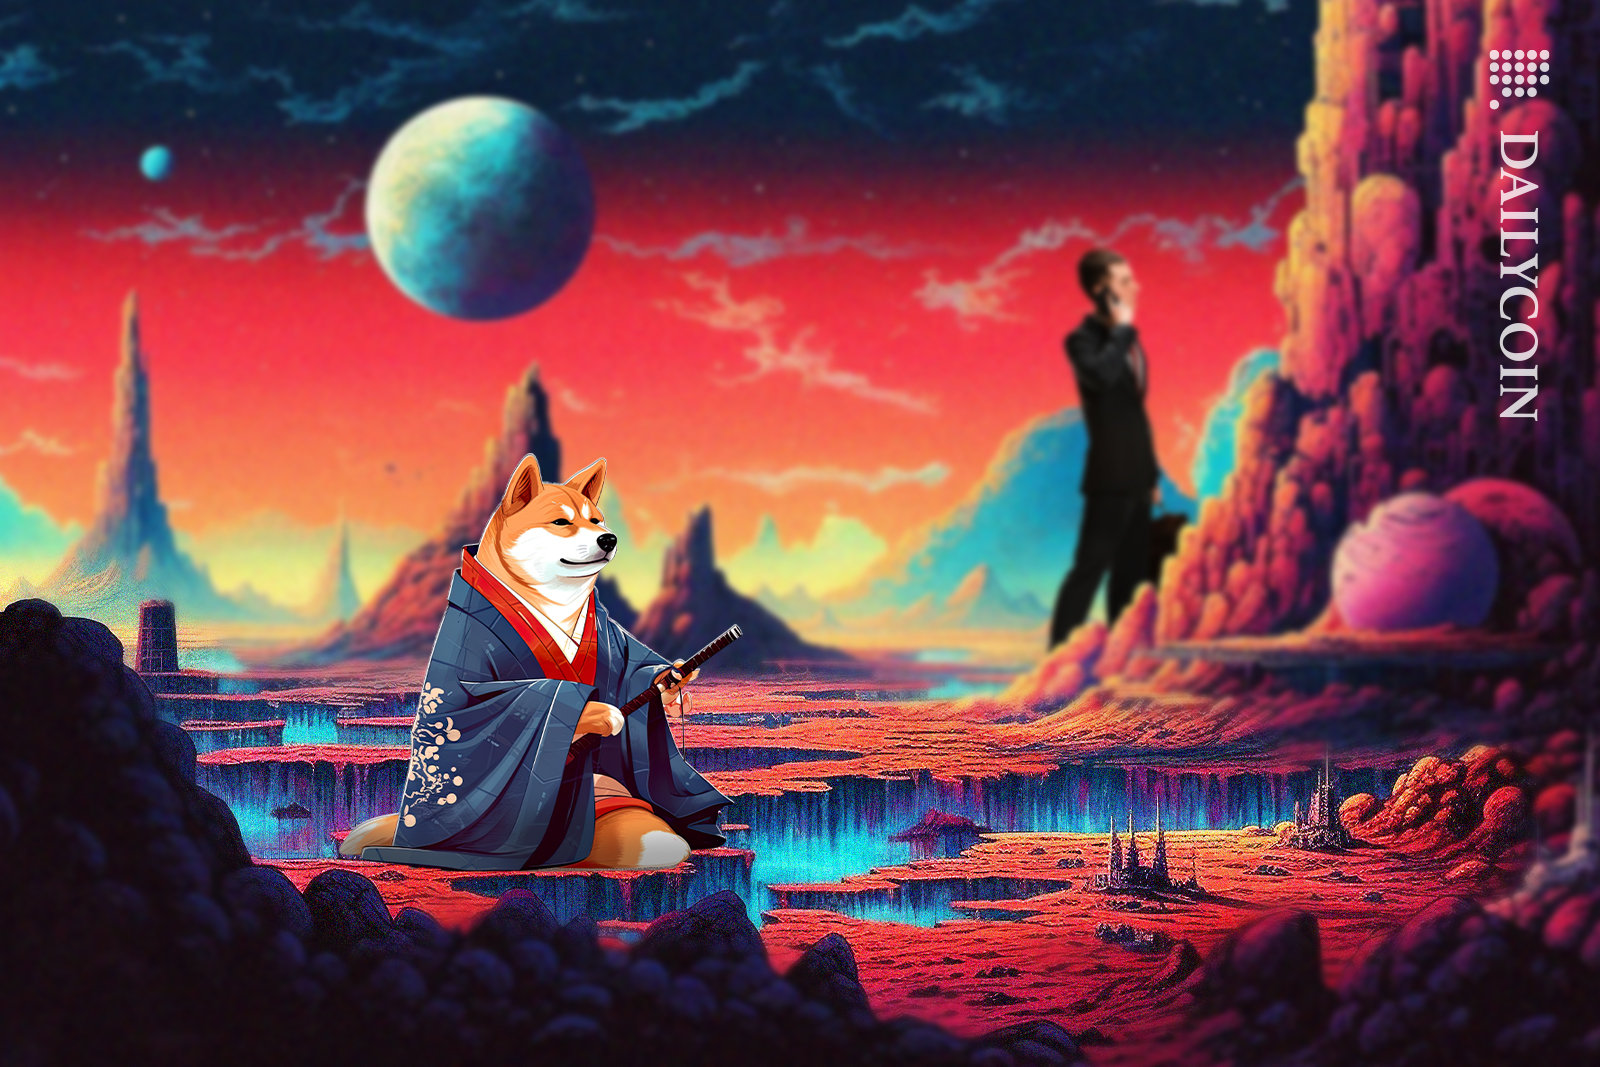 Shiba Inu sitting in his game world, in the distance a man is holding a case making calls.